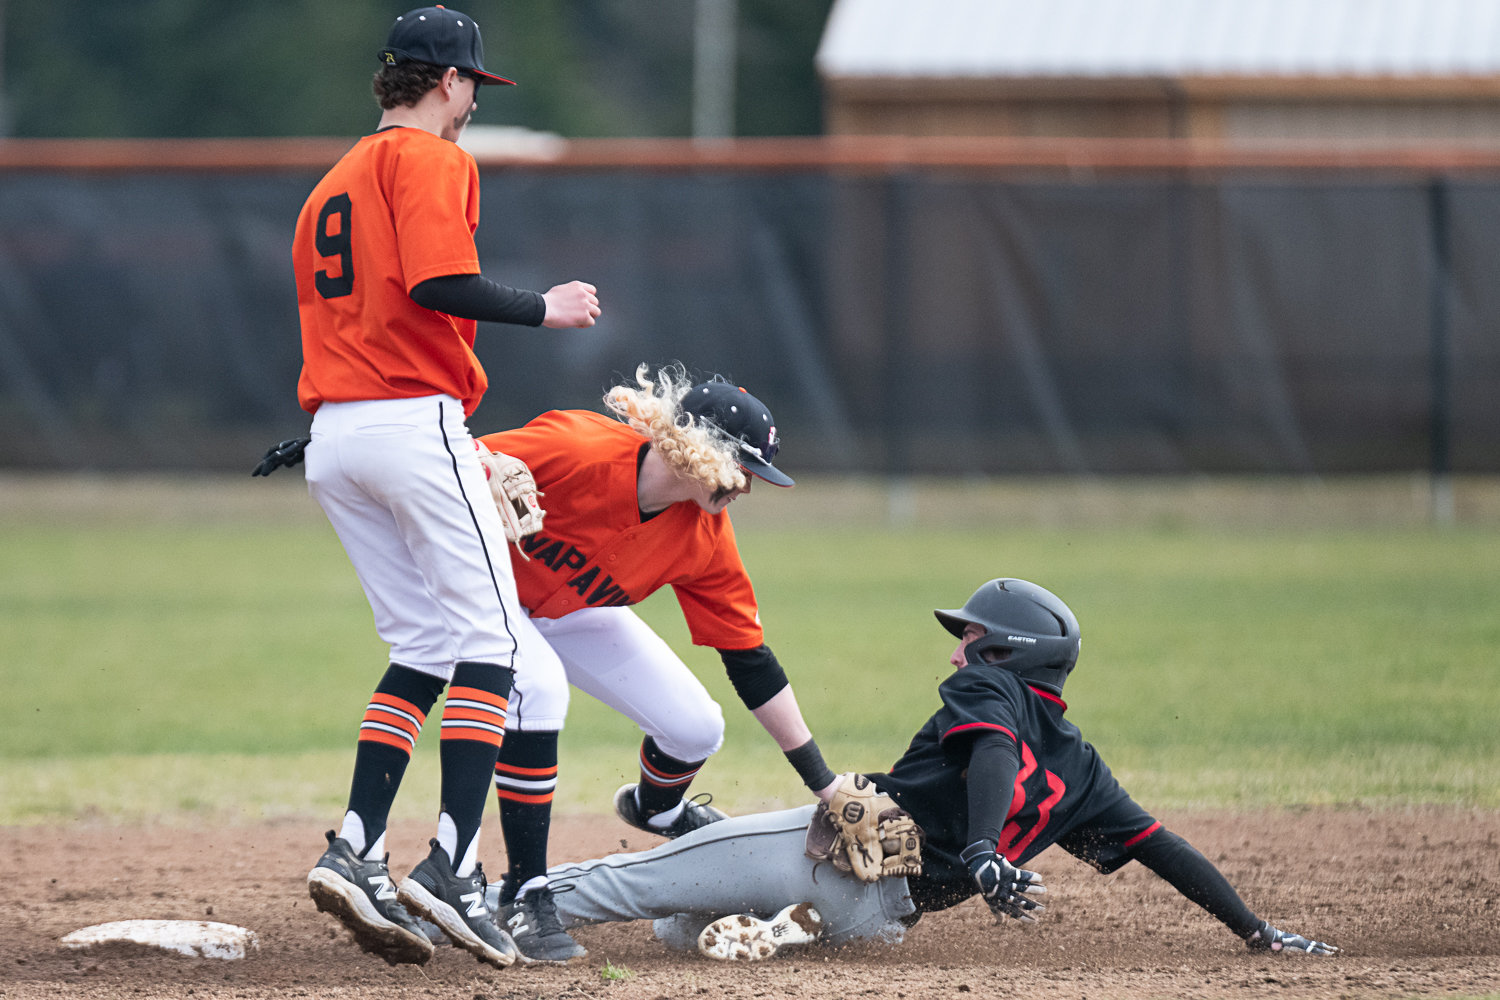 Napavine's Beckett Landrum puts a tag on Toledo's Hunter Feigenbaum during the Tigers' 4-1 loss to the Riverhawks in Game 1 of a doubleheader on March 20.